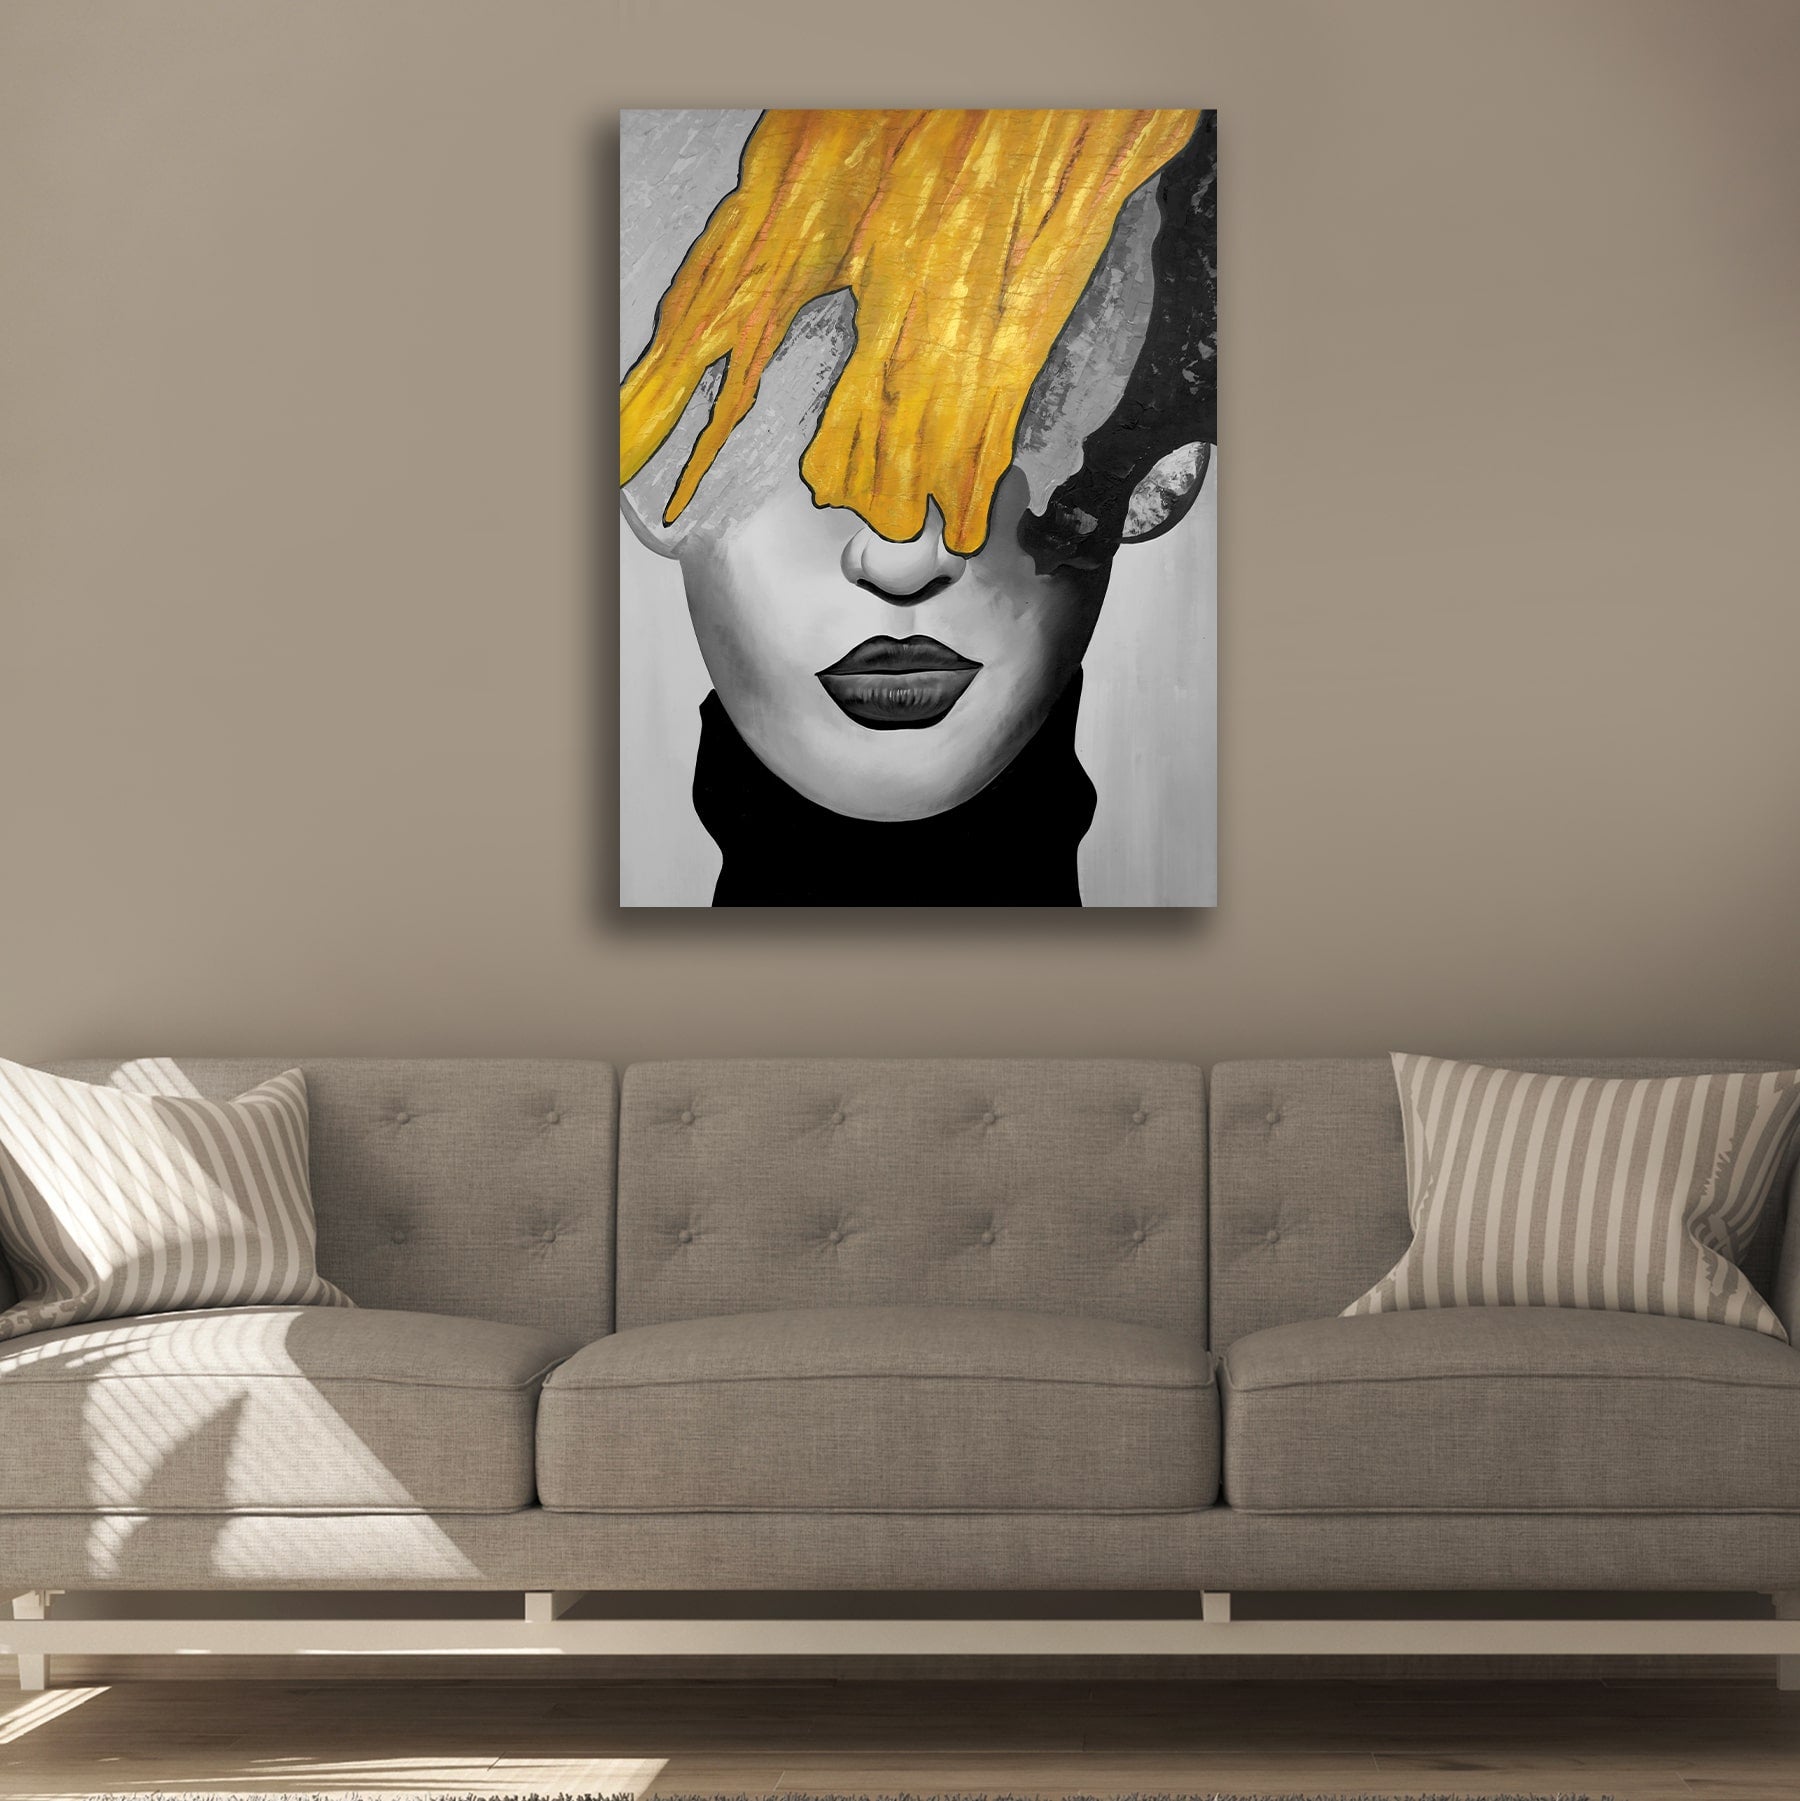 Abstract Canvas Painting A Beautiful Lady Frame for Living Room Wall Decoration